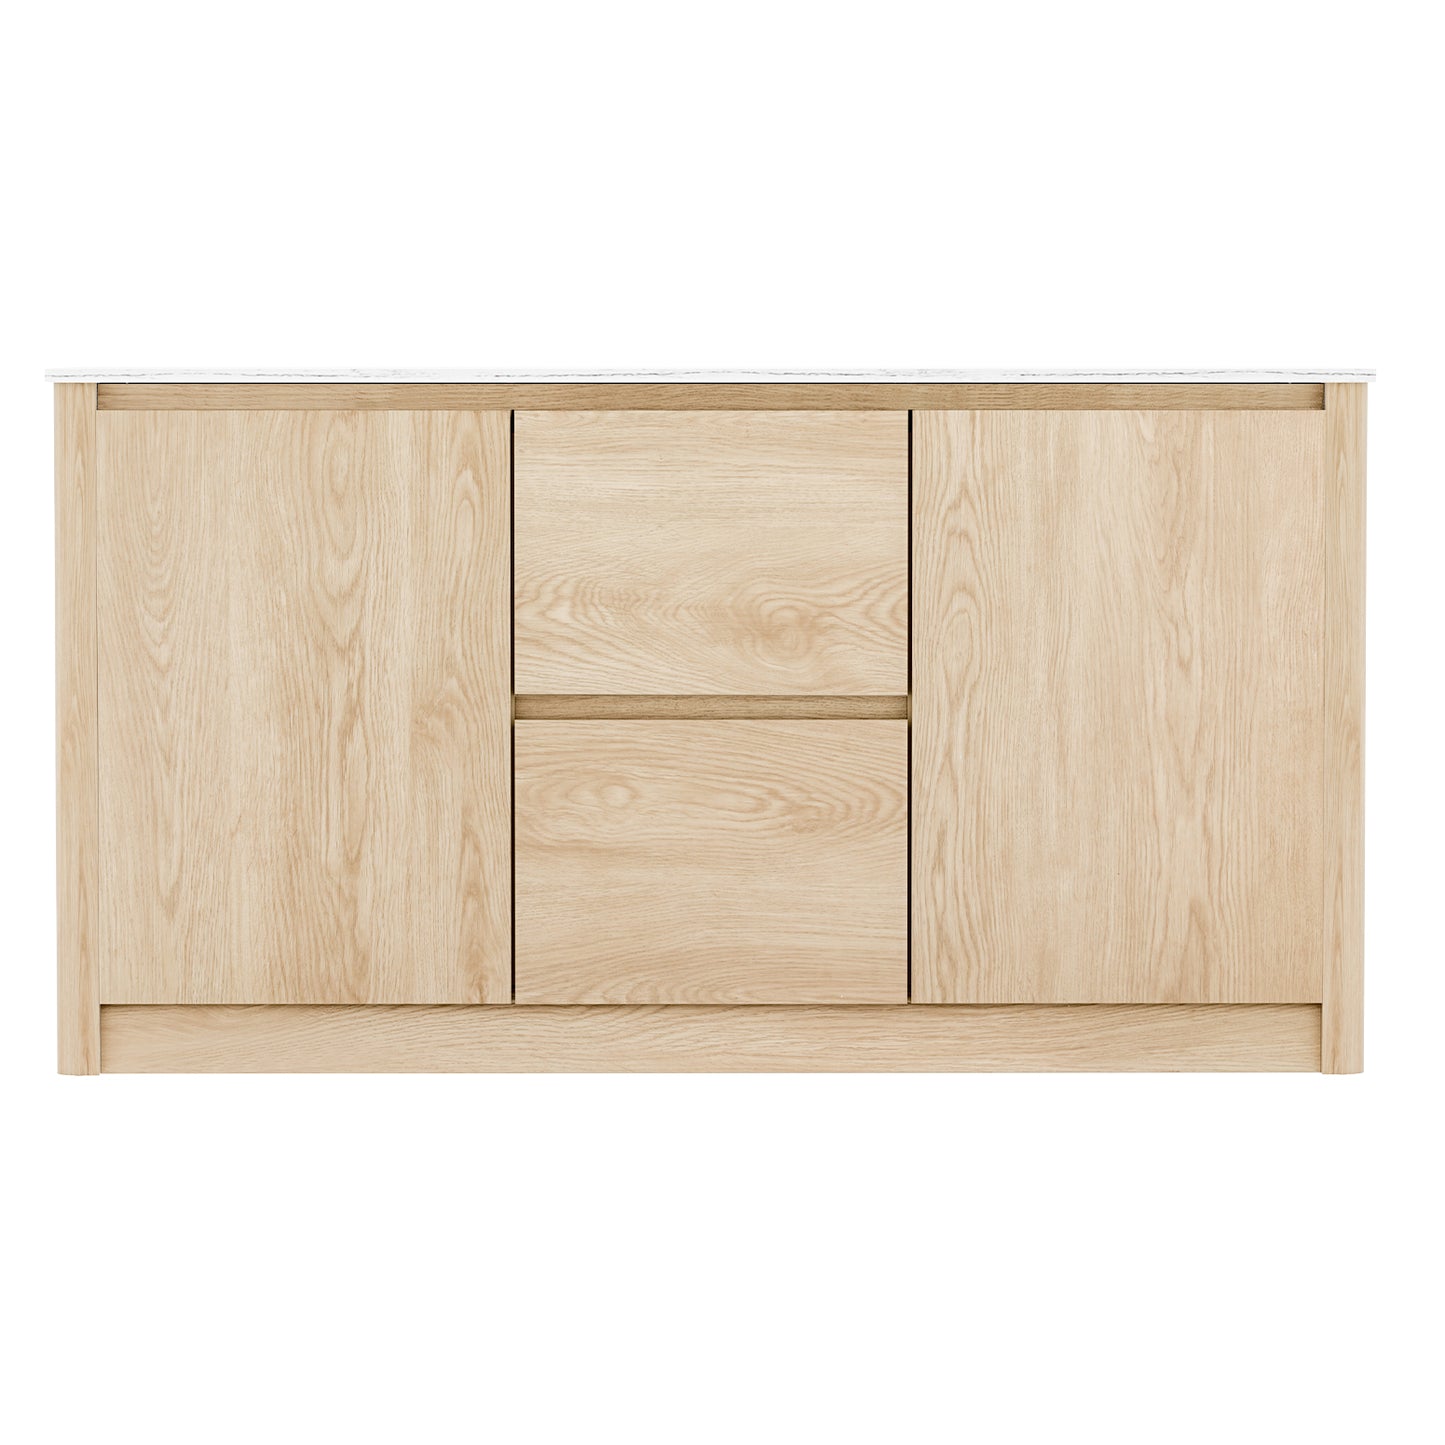 Marble Style Buffet Sideboard - Pine